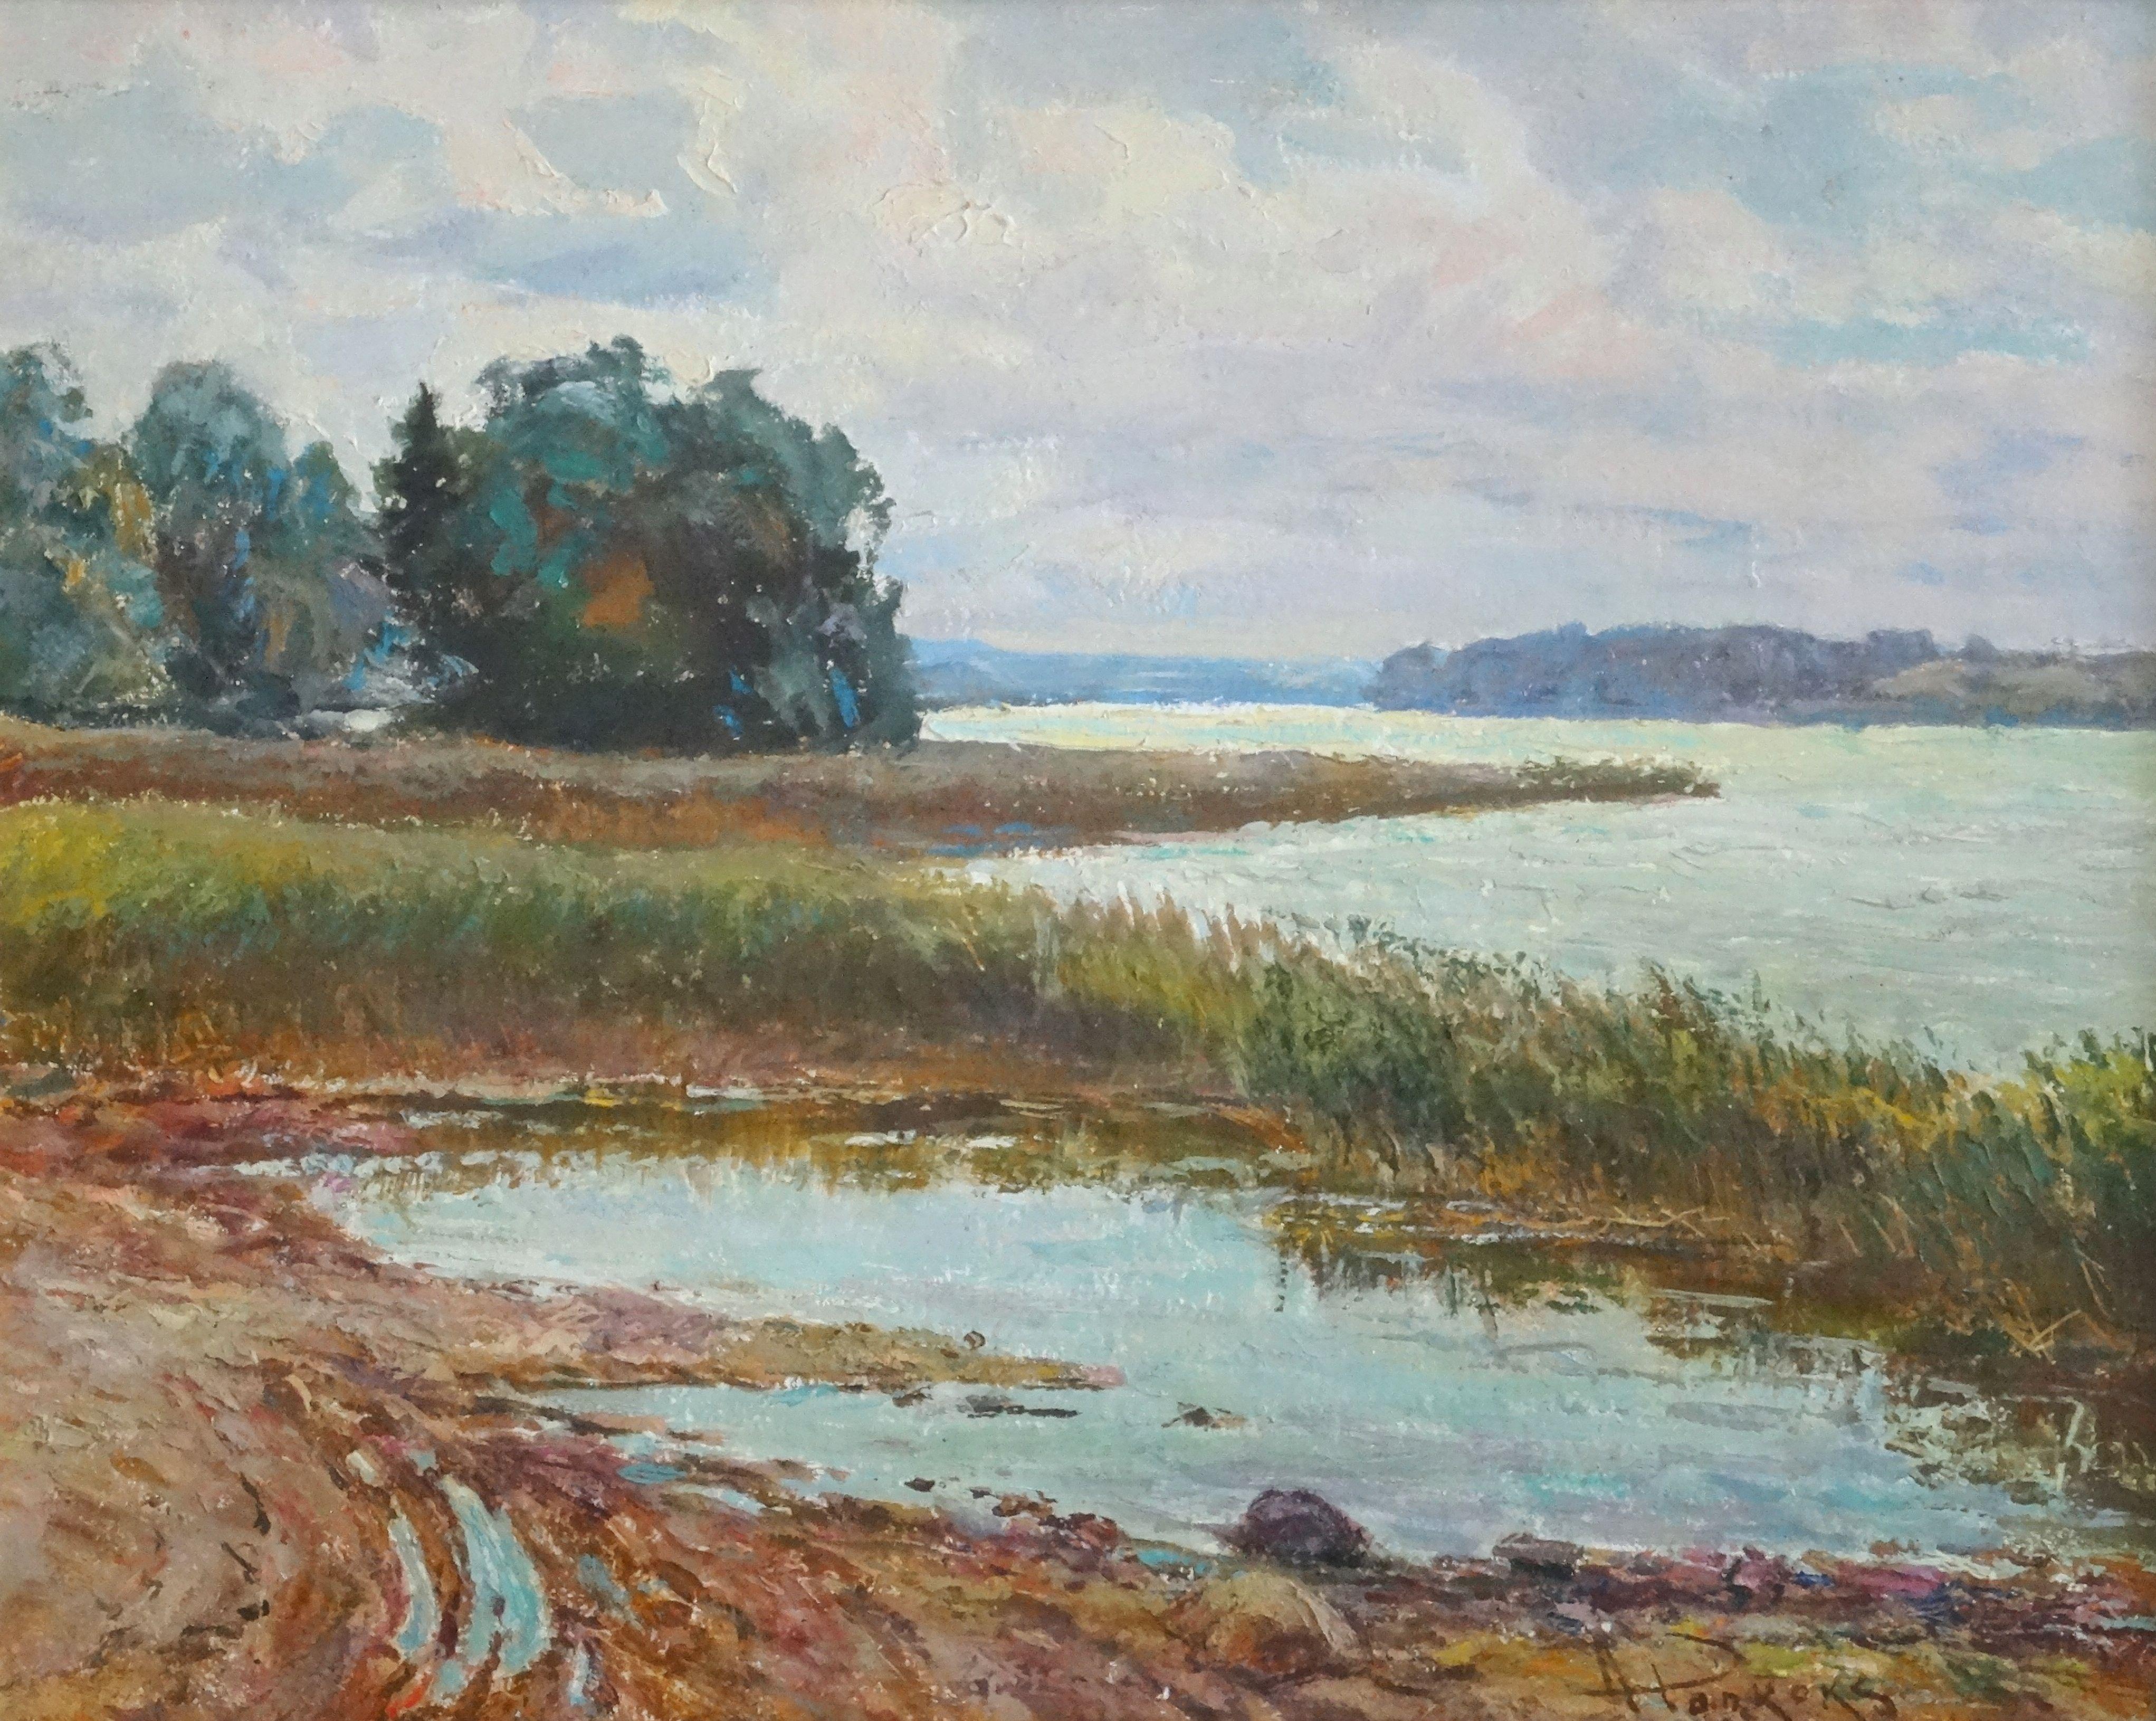 Arnolds Pankoks Landscape Painting - By the lake. Oil on cardboard, 40x50 cm